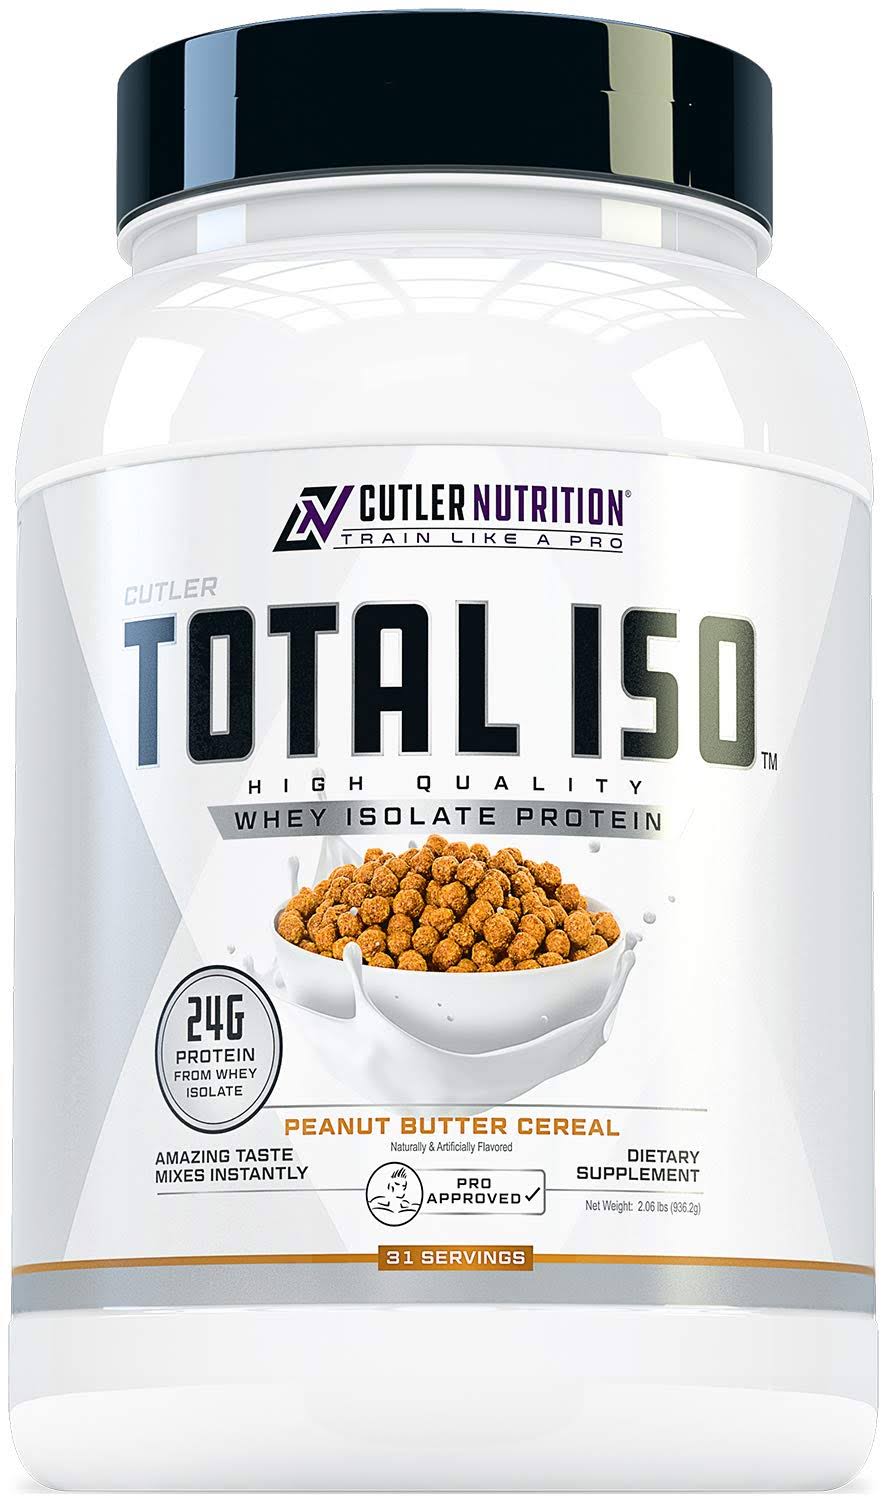 Cutler Nutrition | Total iso, Peanut Butter Cereal